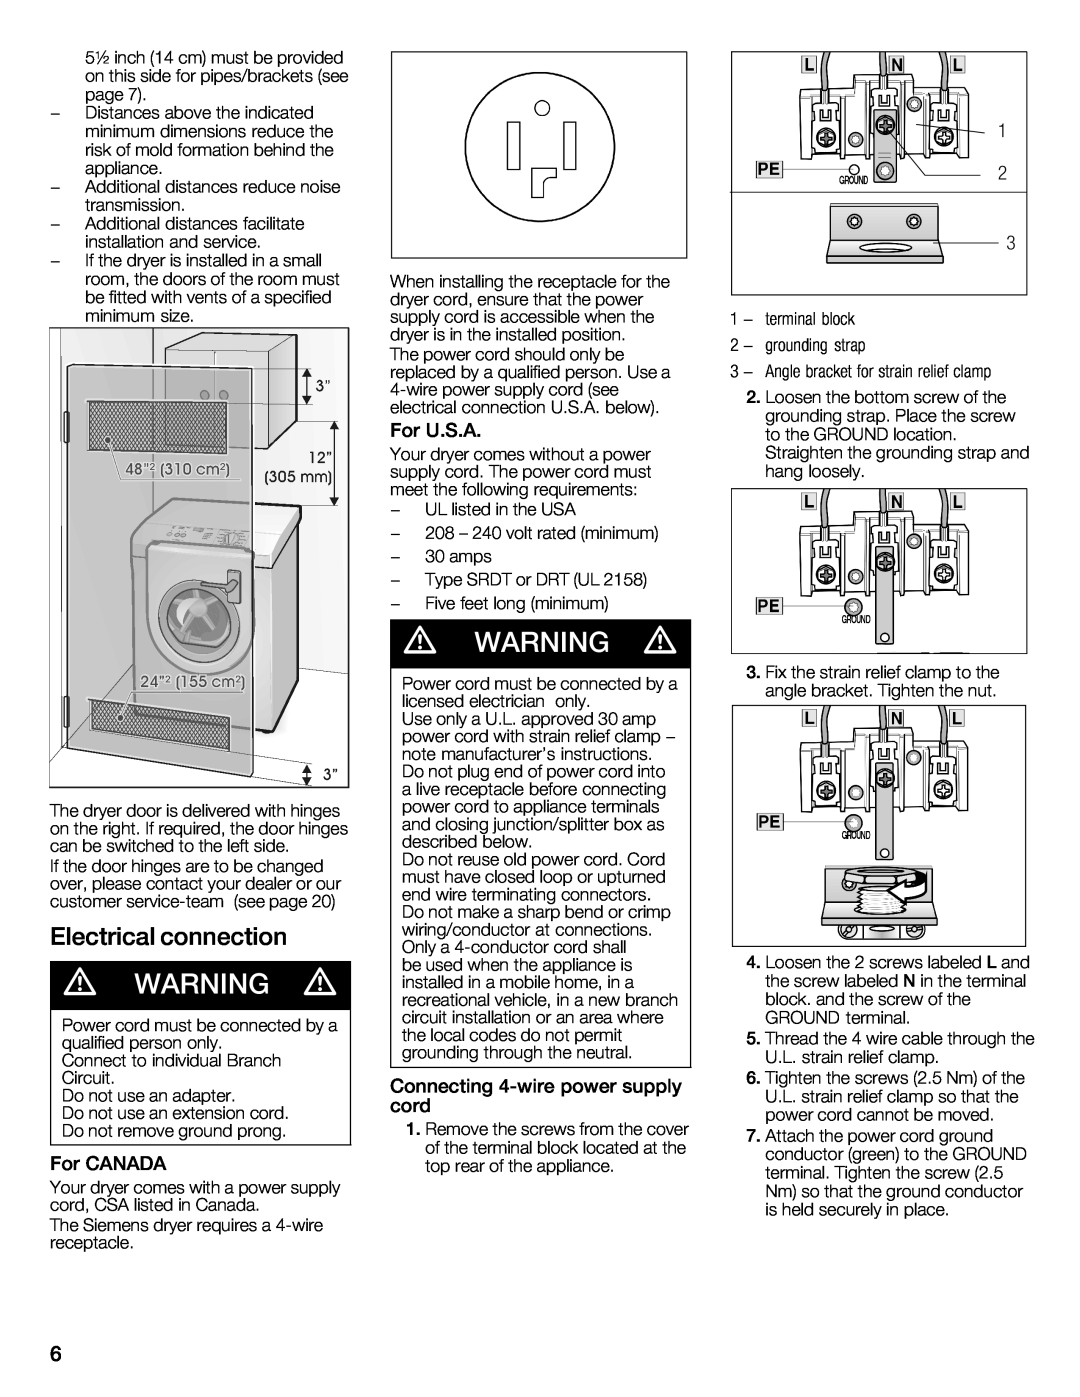 Bosch Appliances WTXD5321US, WTXD5321CN installation instructions d WARNING, Electrical, connection, 4Wwire 